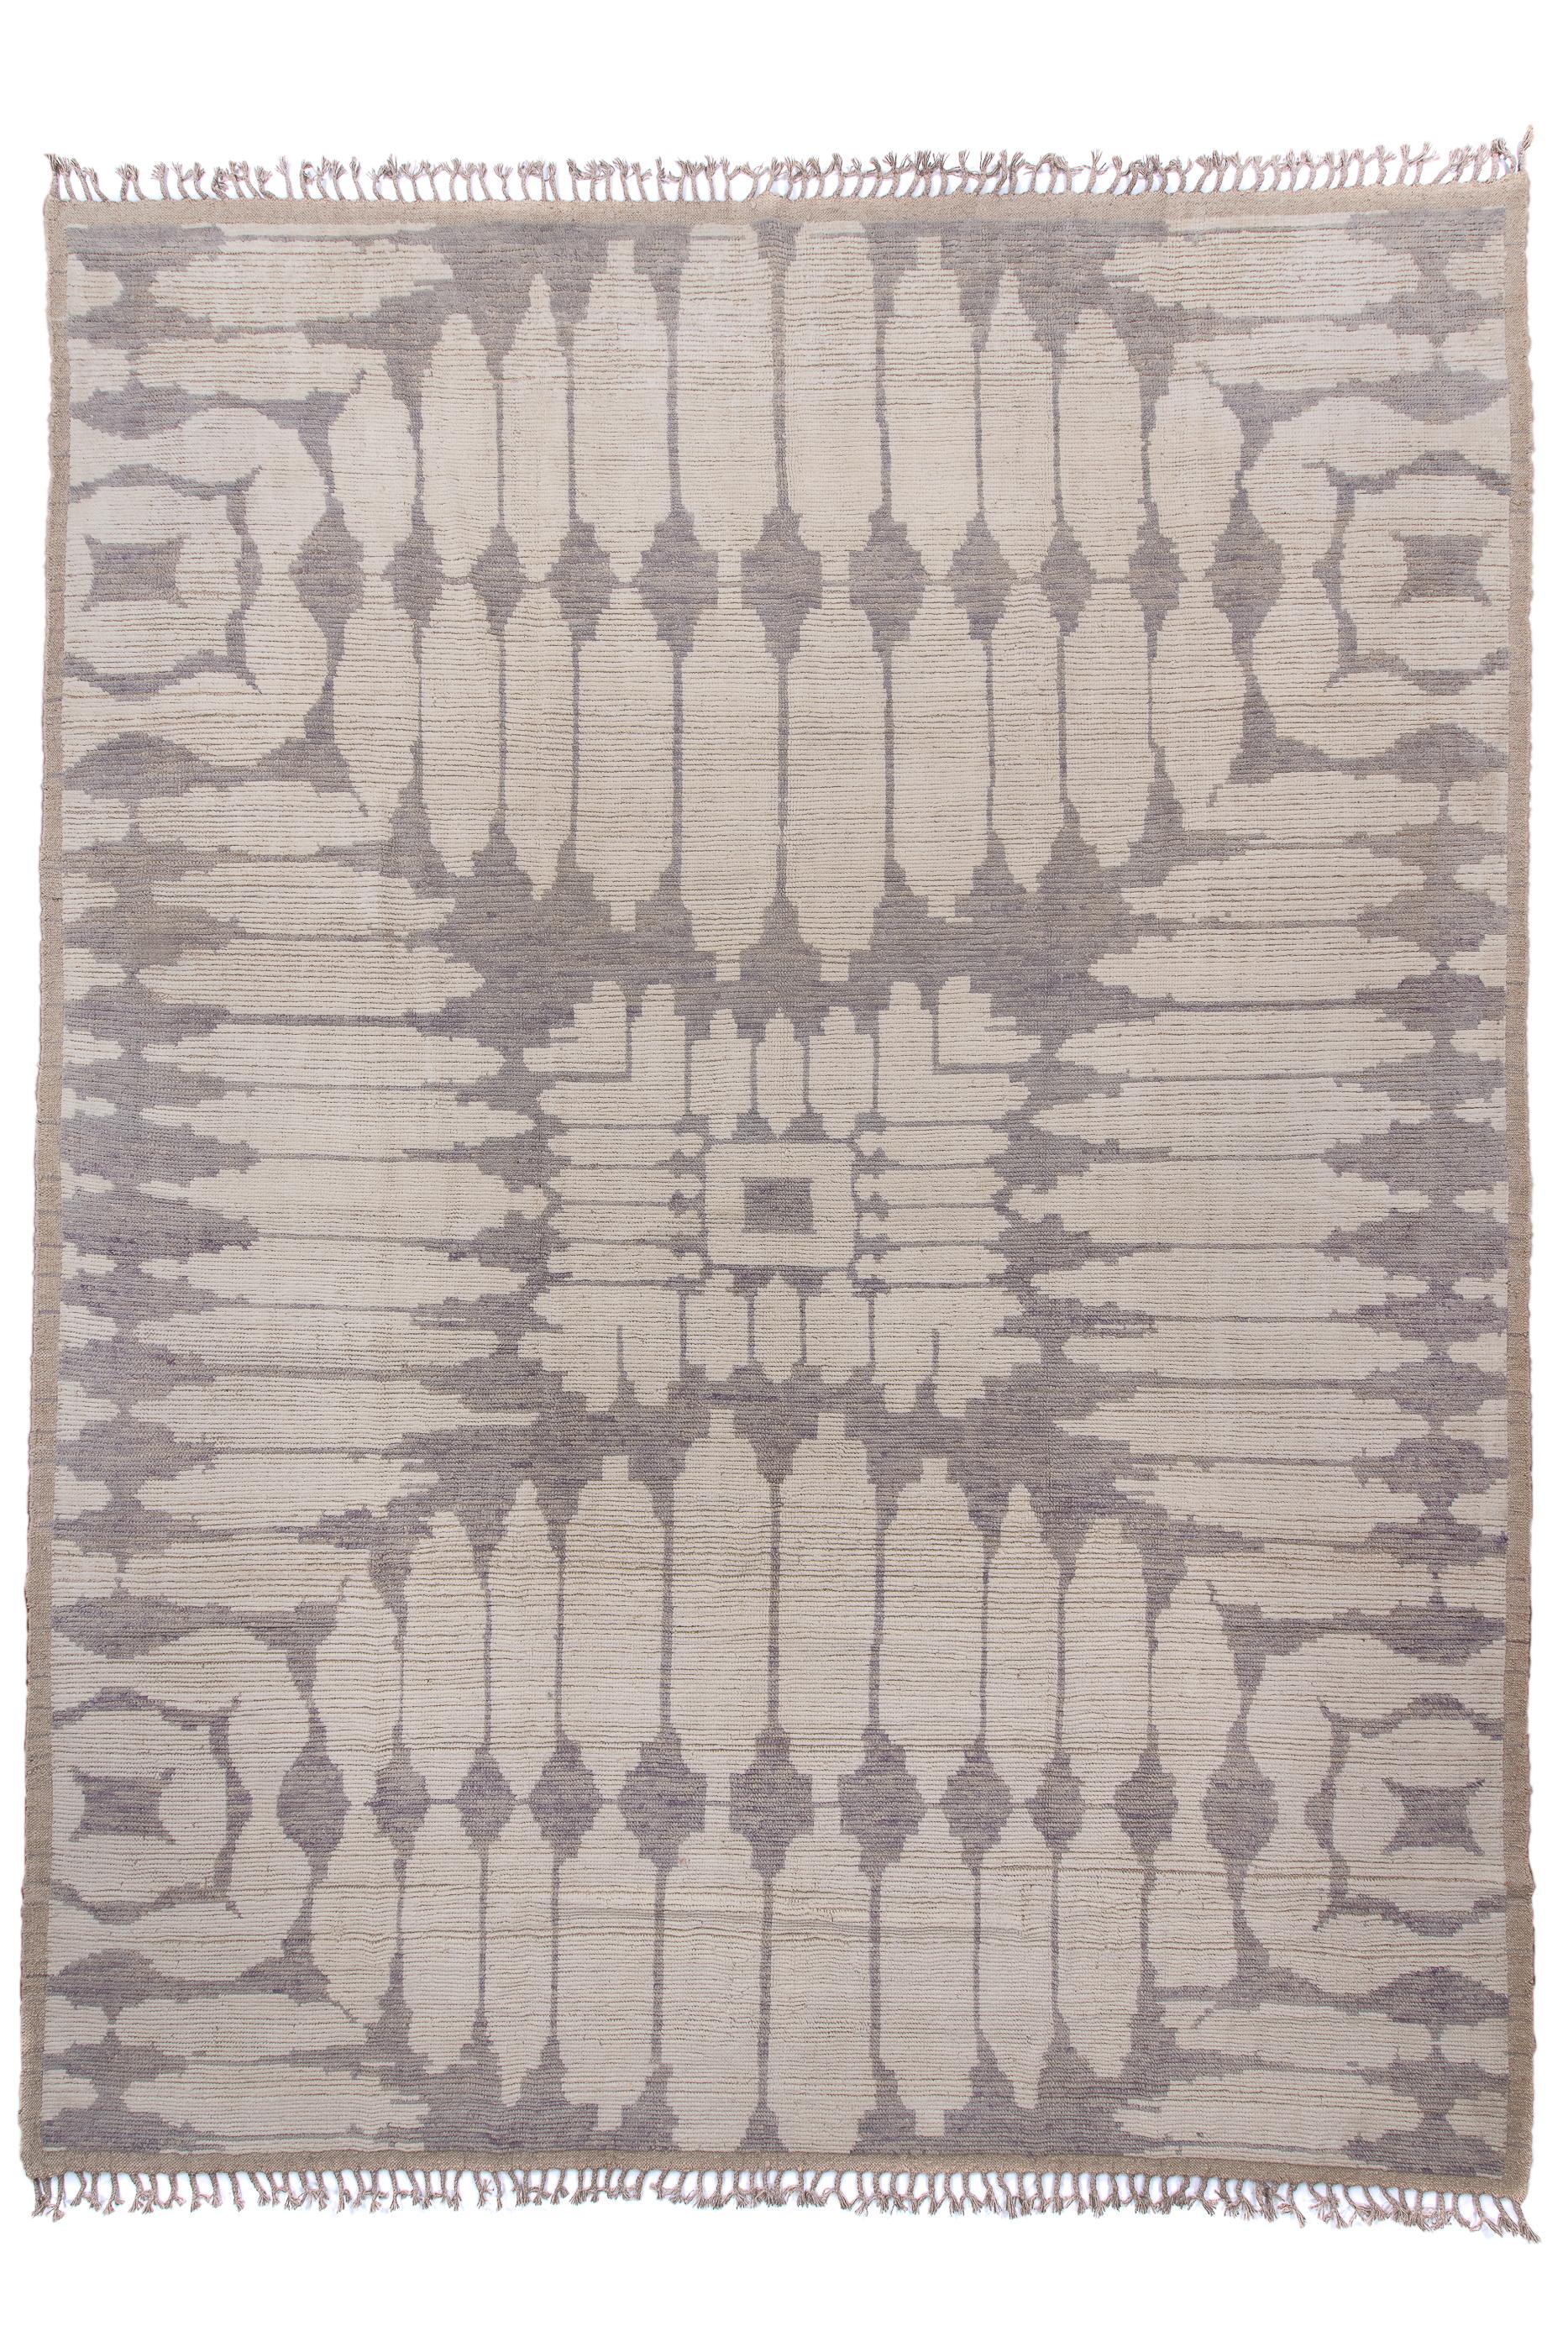 Central Turkey

This long pile Anatolian carpet seems to expand outwardly in an optical illusion, around a concave square centre, all in shades of brown and beiger, with single or double paddles.  Abrash relieves the bitonal effect. Coarse weave